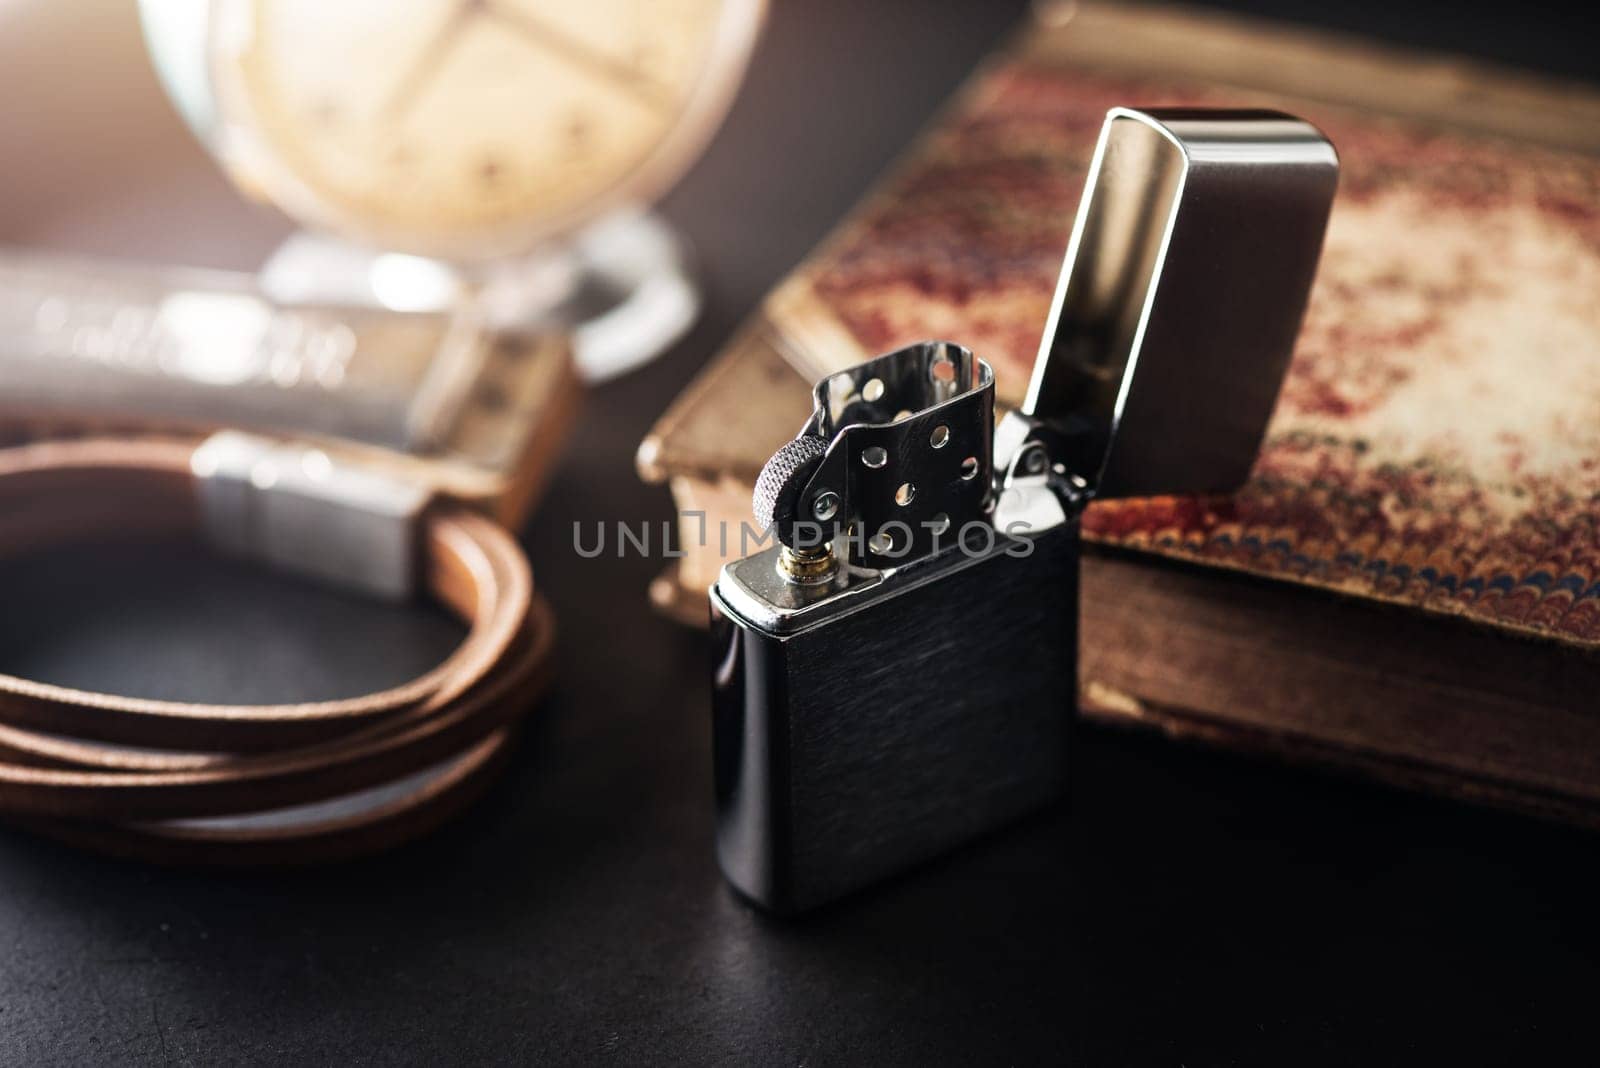 Brushed chrome lighter with windproof. One of everyday carry item for men. Shallow depth of field.